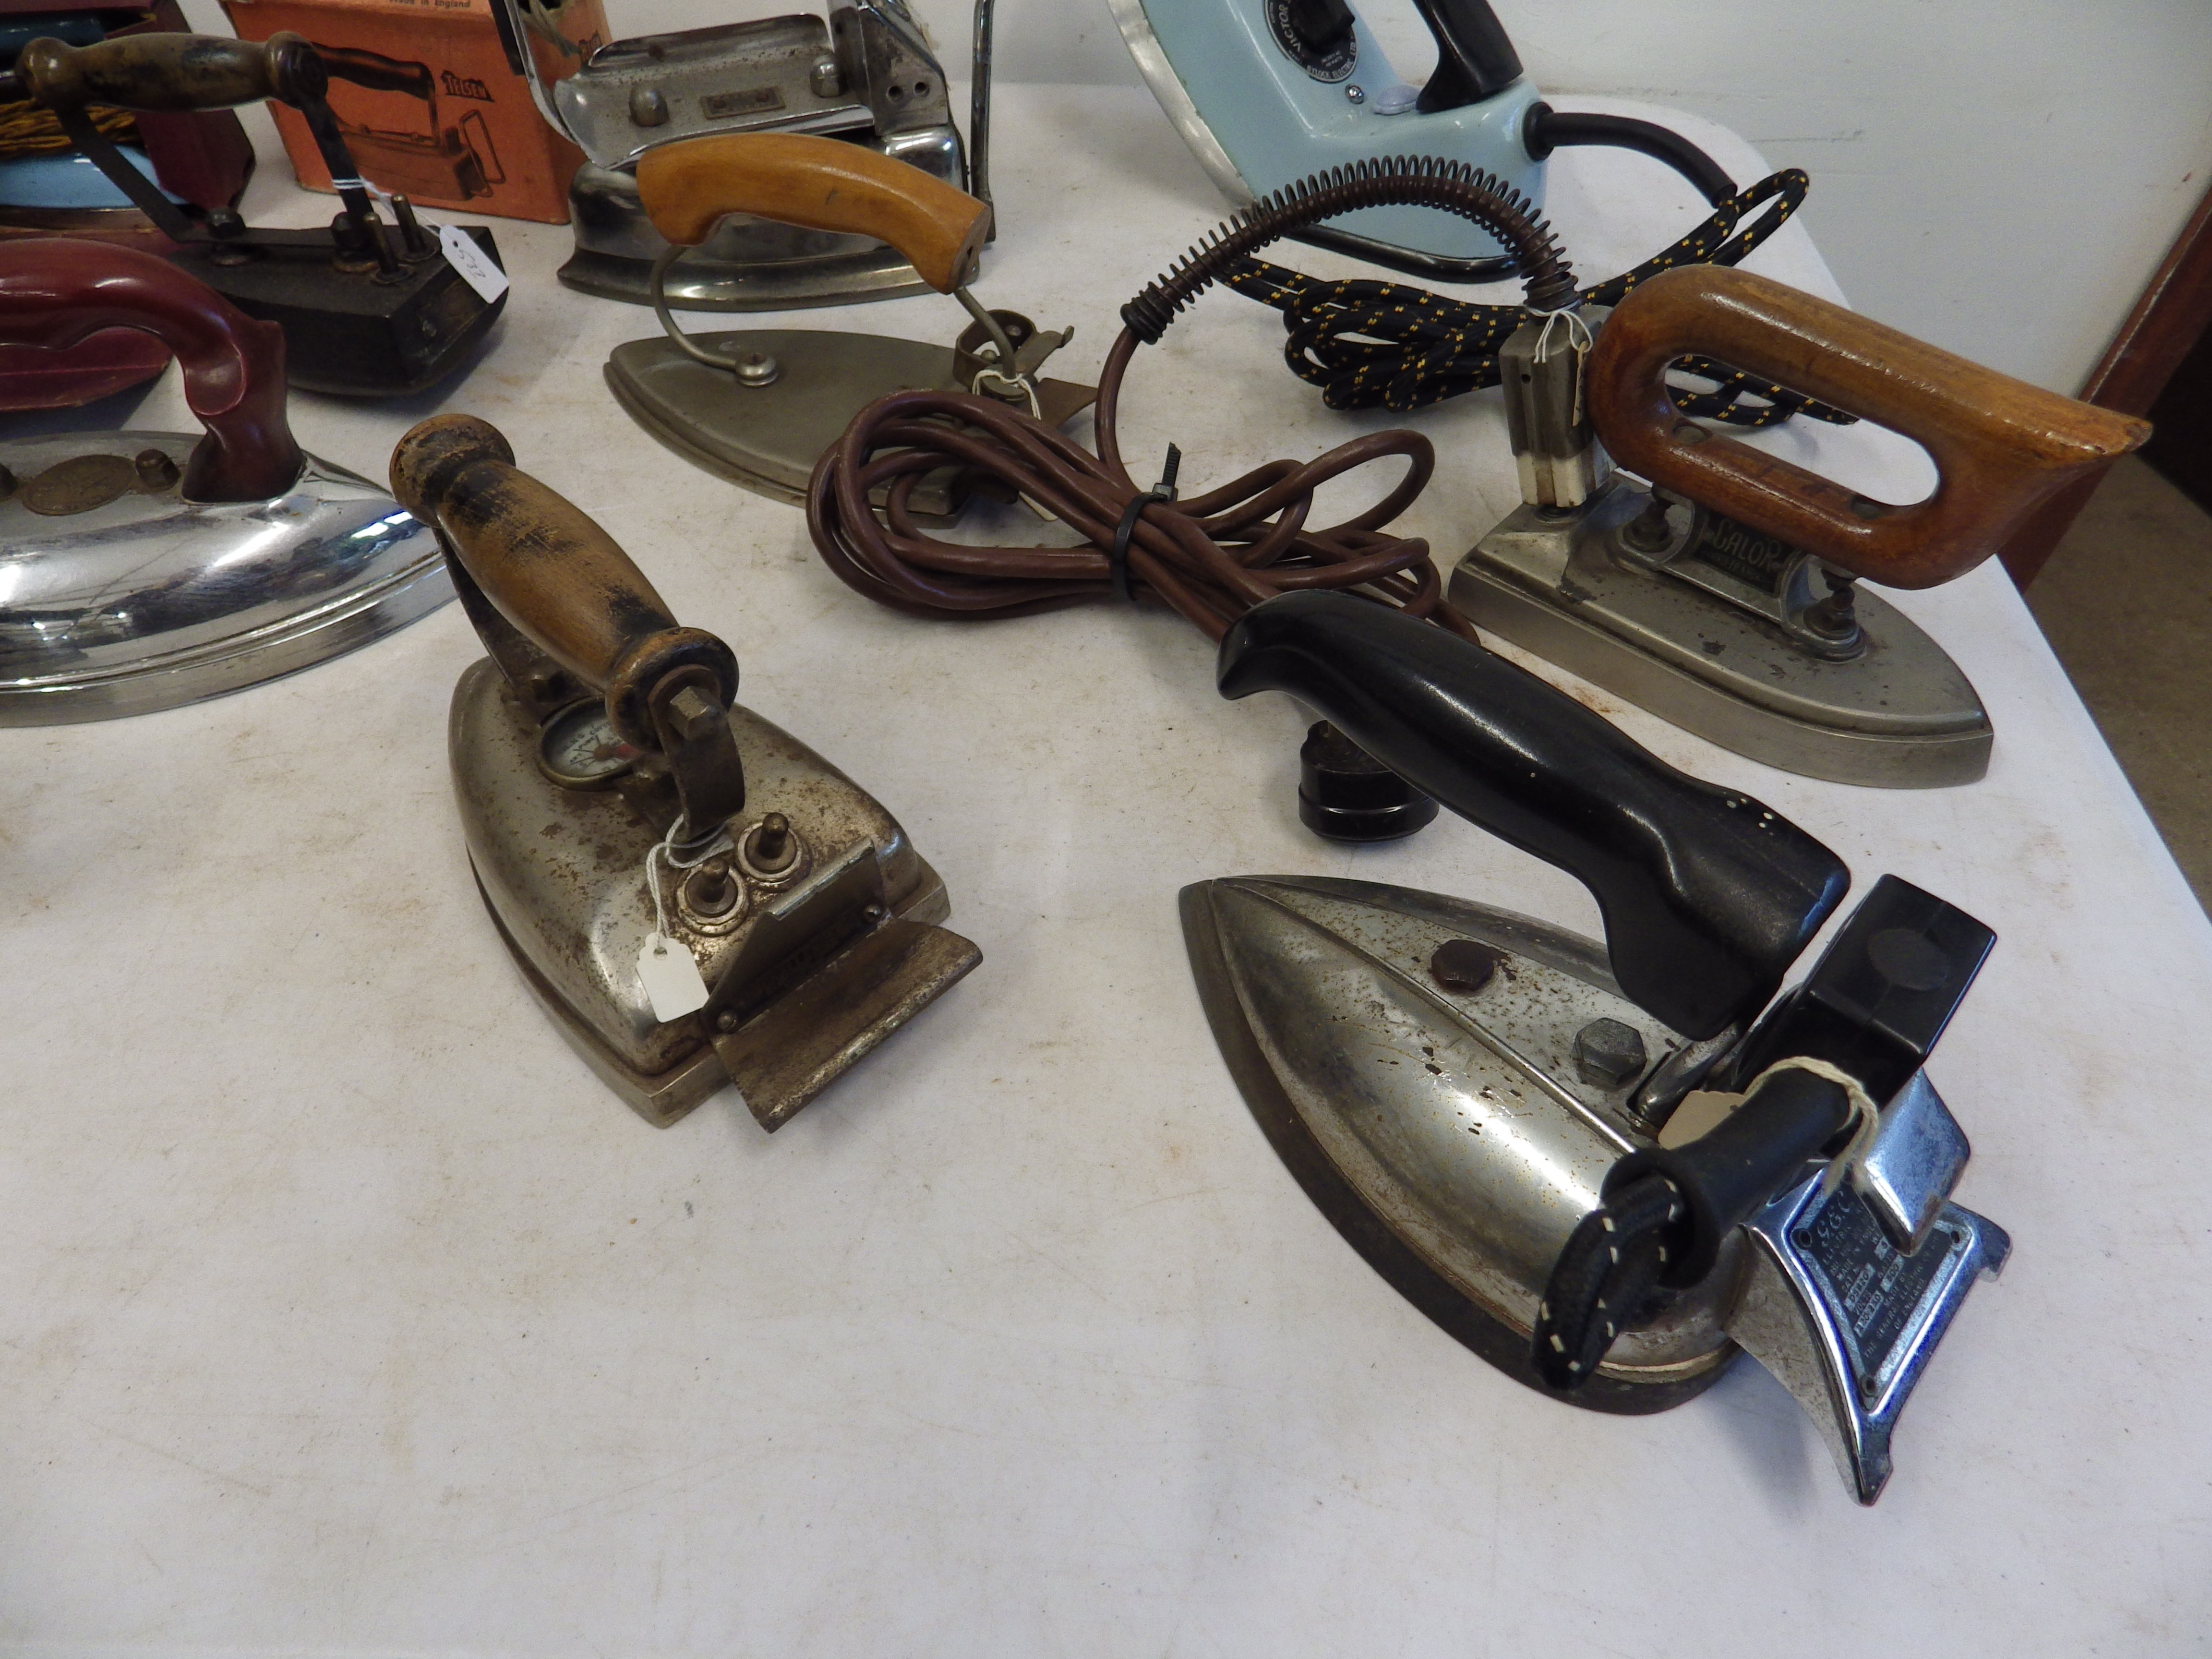 Assorted vintage electric and travel irons, some with original boxes and cases, all for display - Image 4 of 5